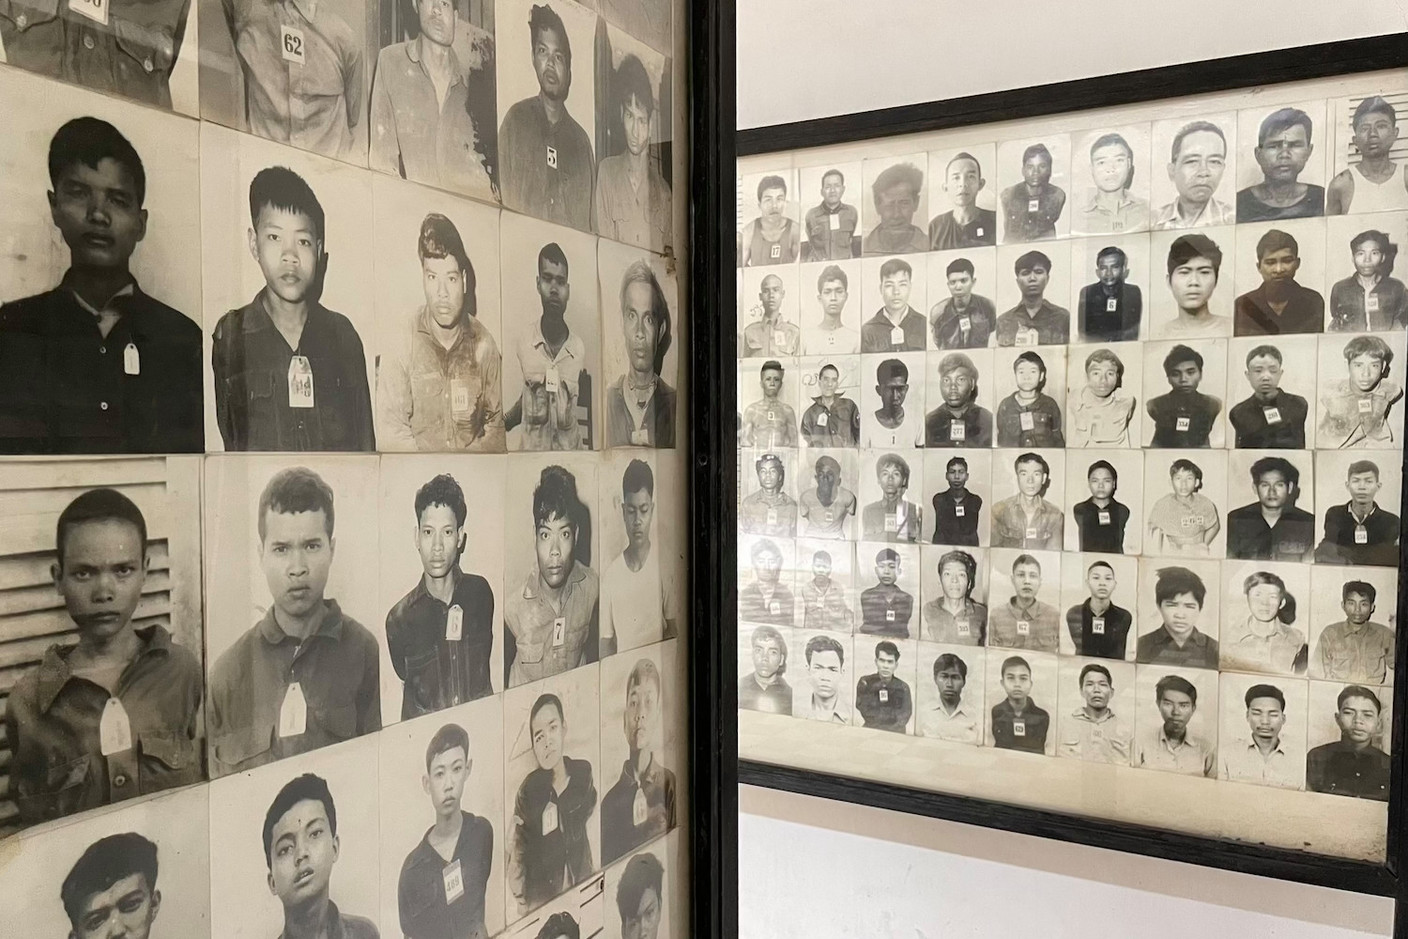 A darker chapter of Cambodian history, with photos of victims on display at the Tuol Sleng genocide museum. Photos: Cordula Schnuer